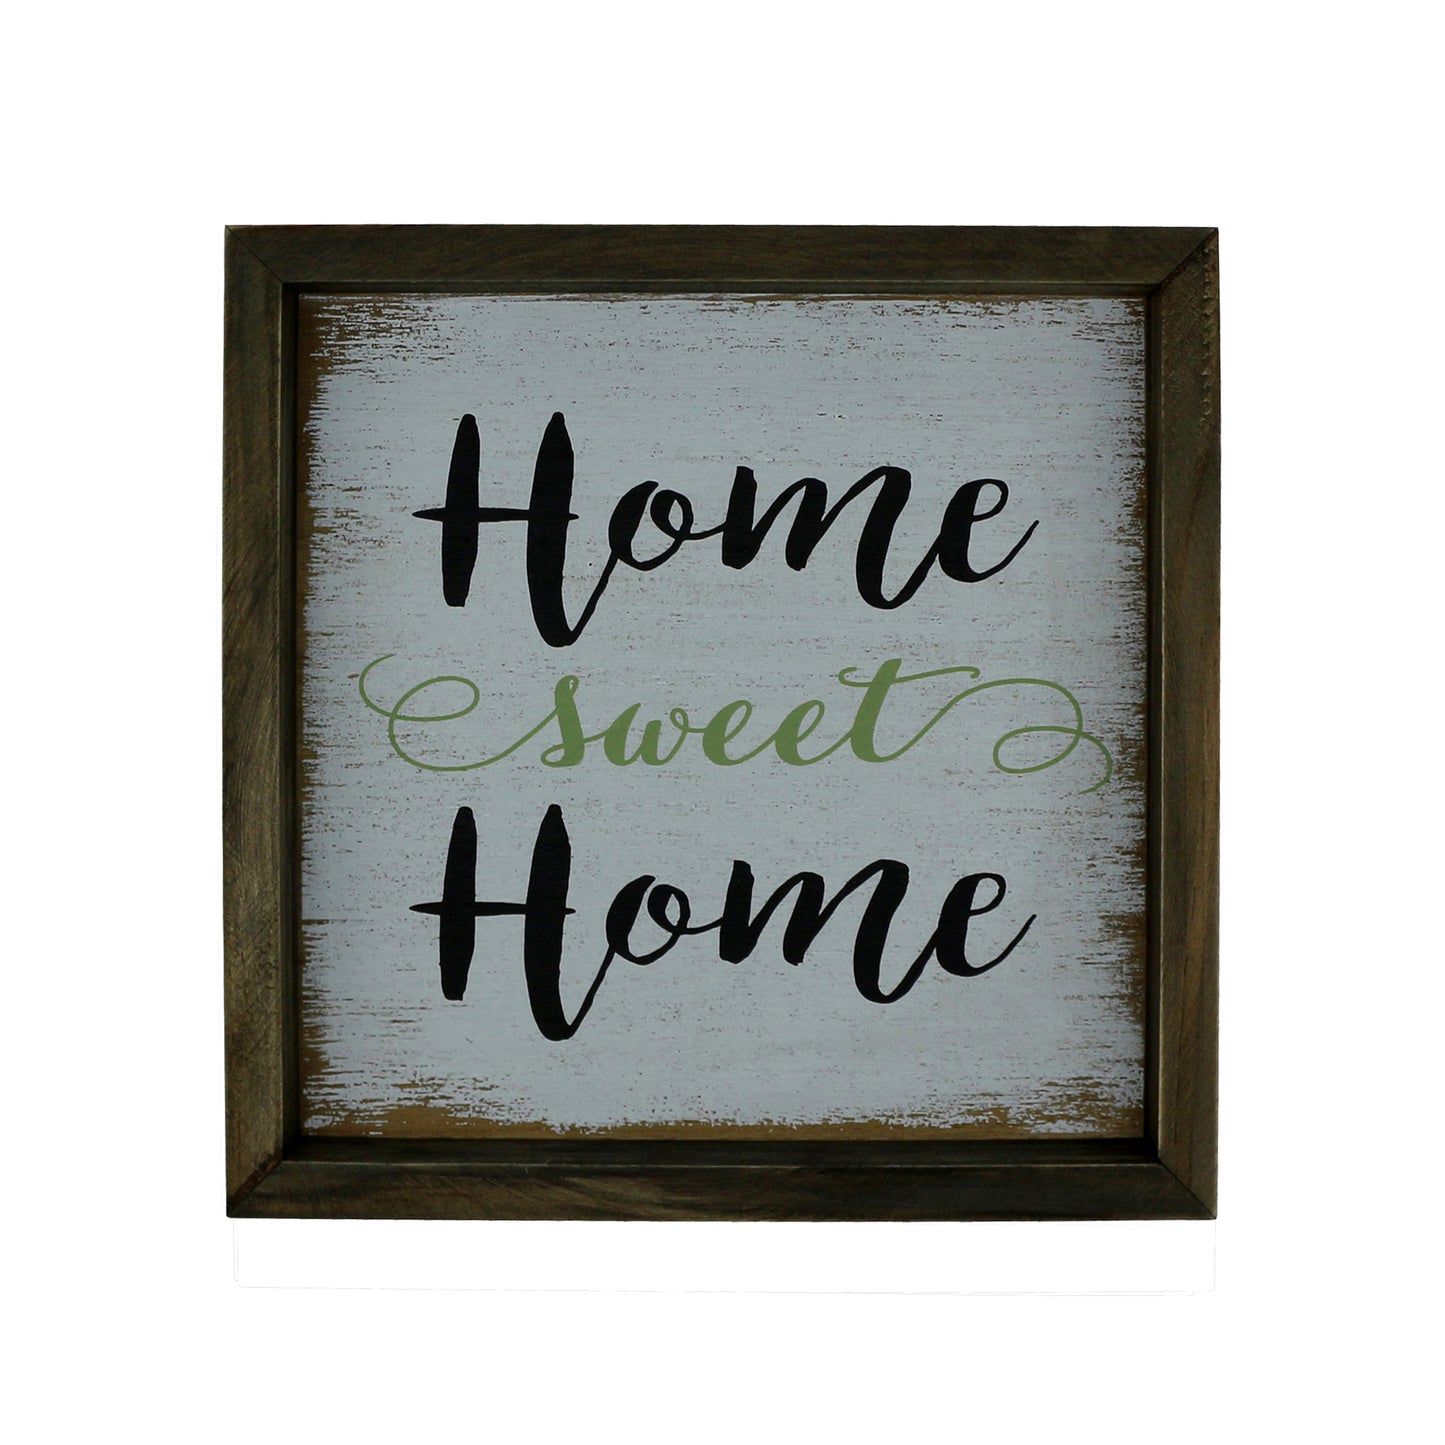 CVHOMEDECO. Primitives Distressed "Home sweet Home" Shadow Box Frame Wall Mounted Hanging Decor Art, 9.75 x 9.75 Inch